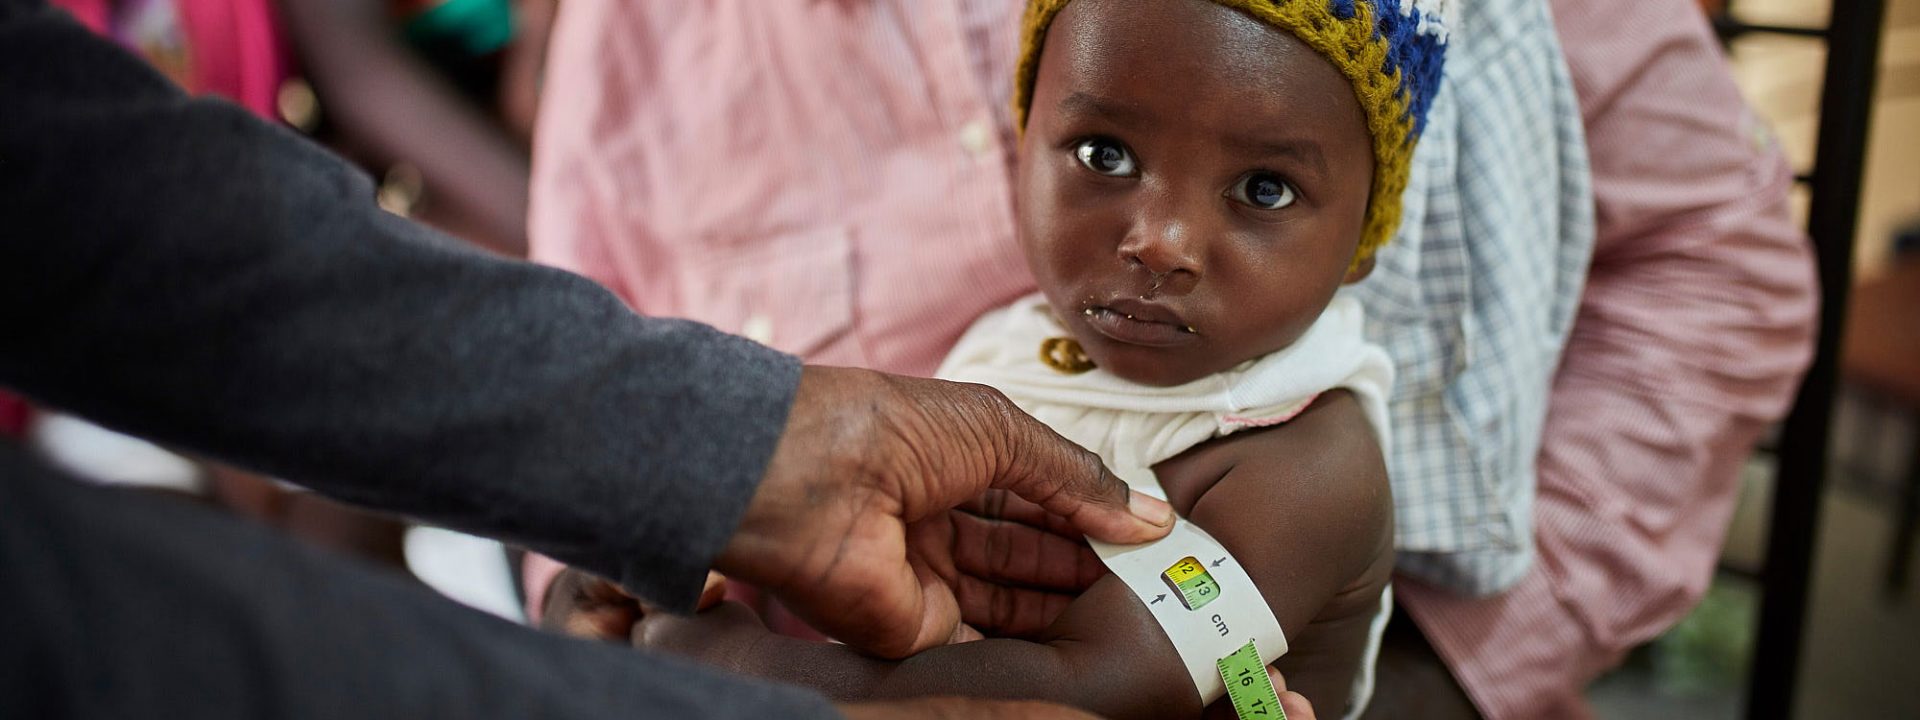 A child is screened for malnutrition using a MUAC band at an Action Against Hunger treatment centre in Haiti.